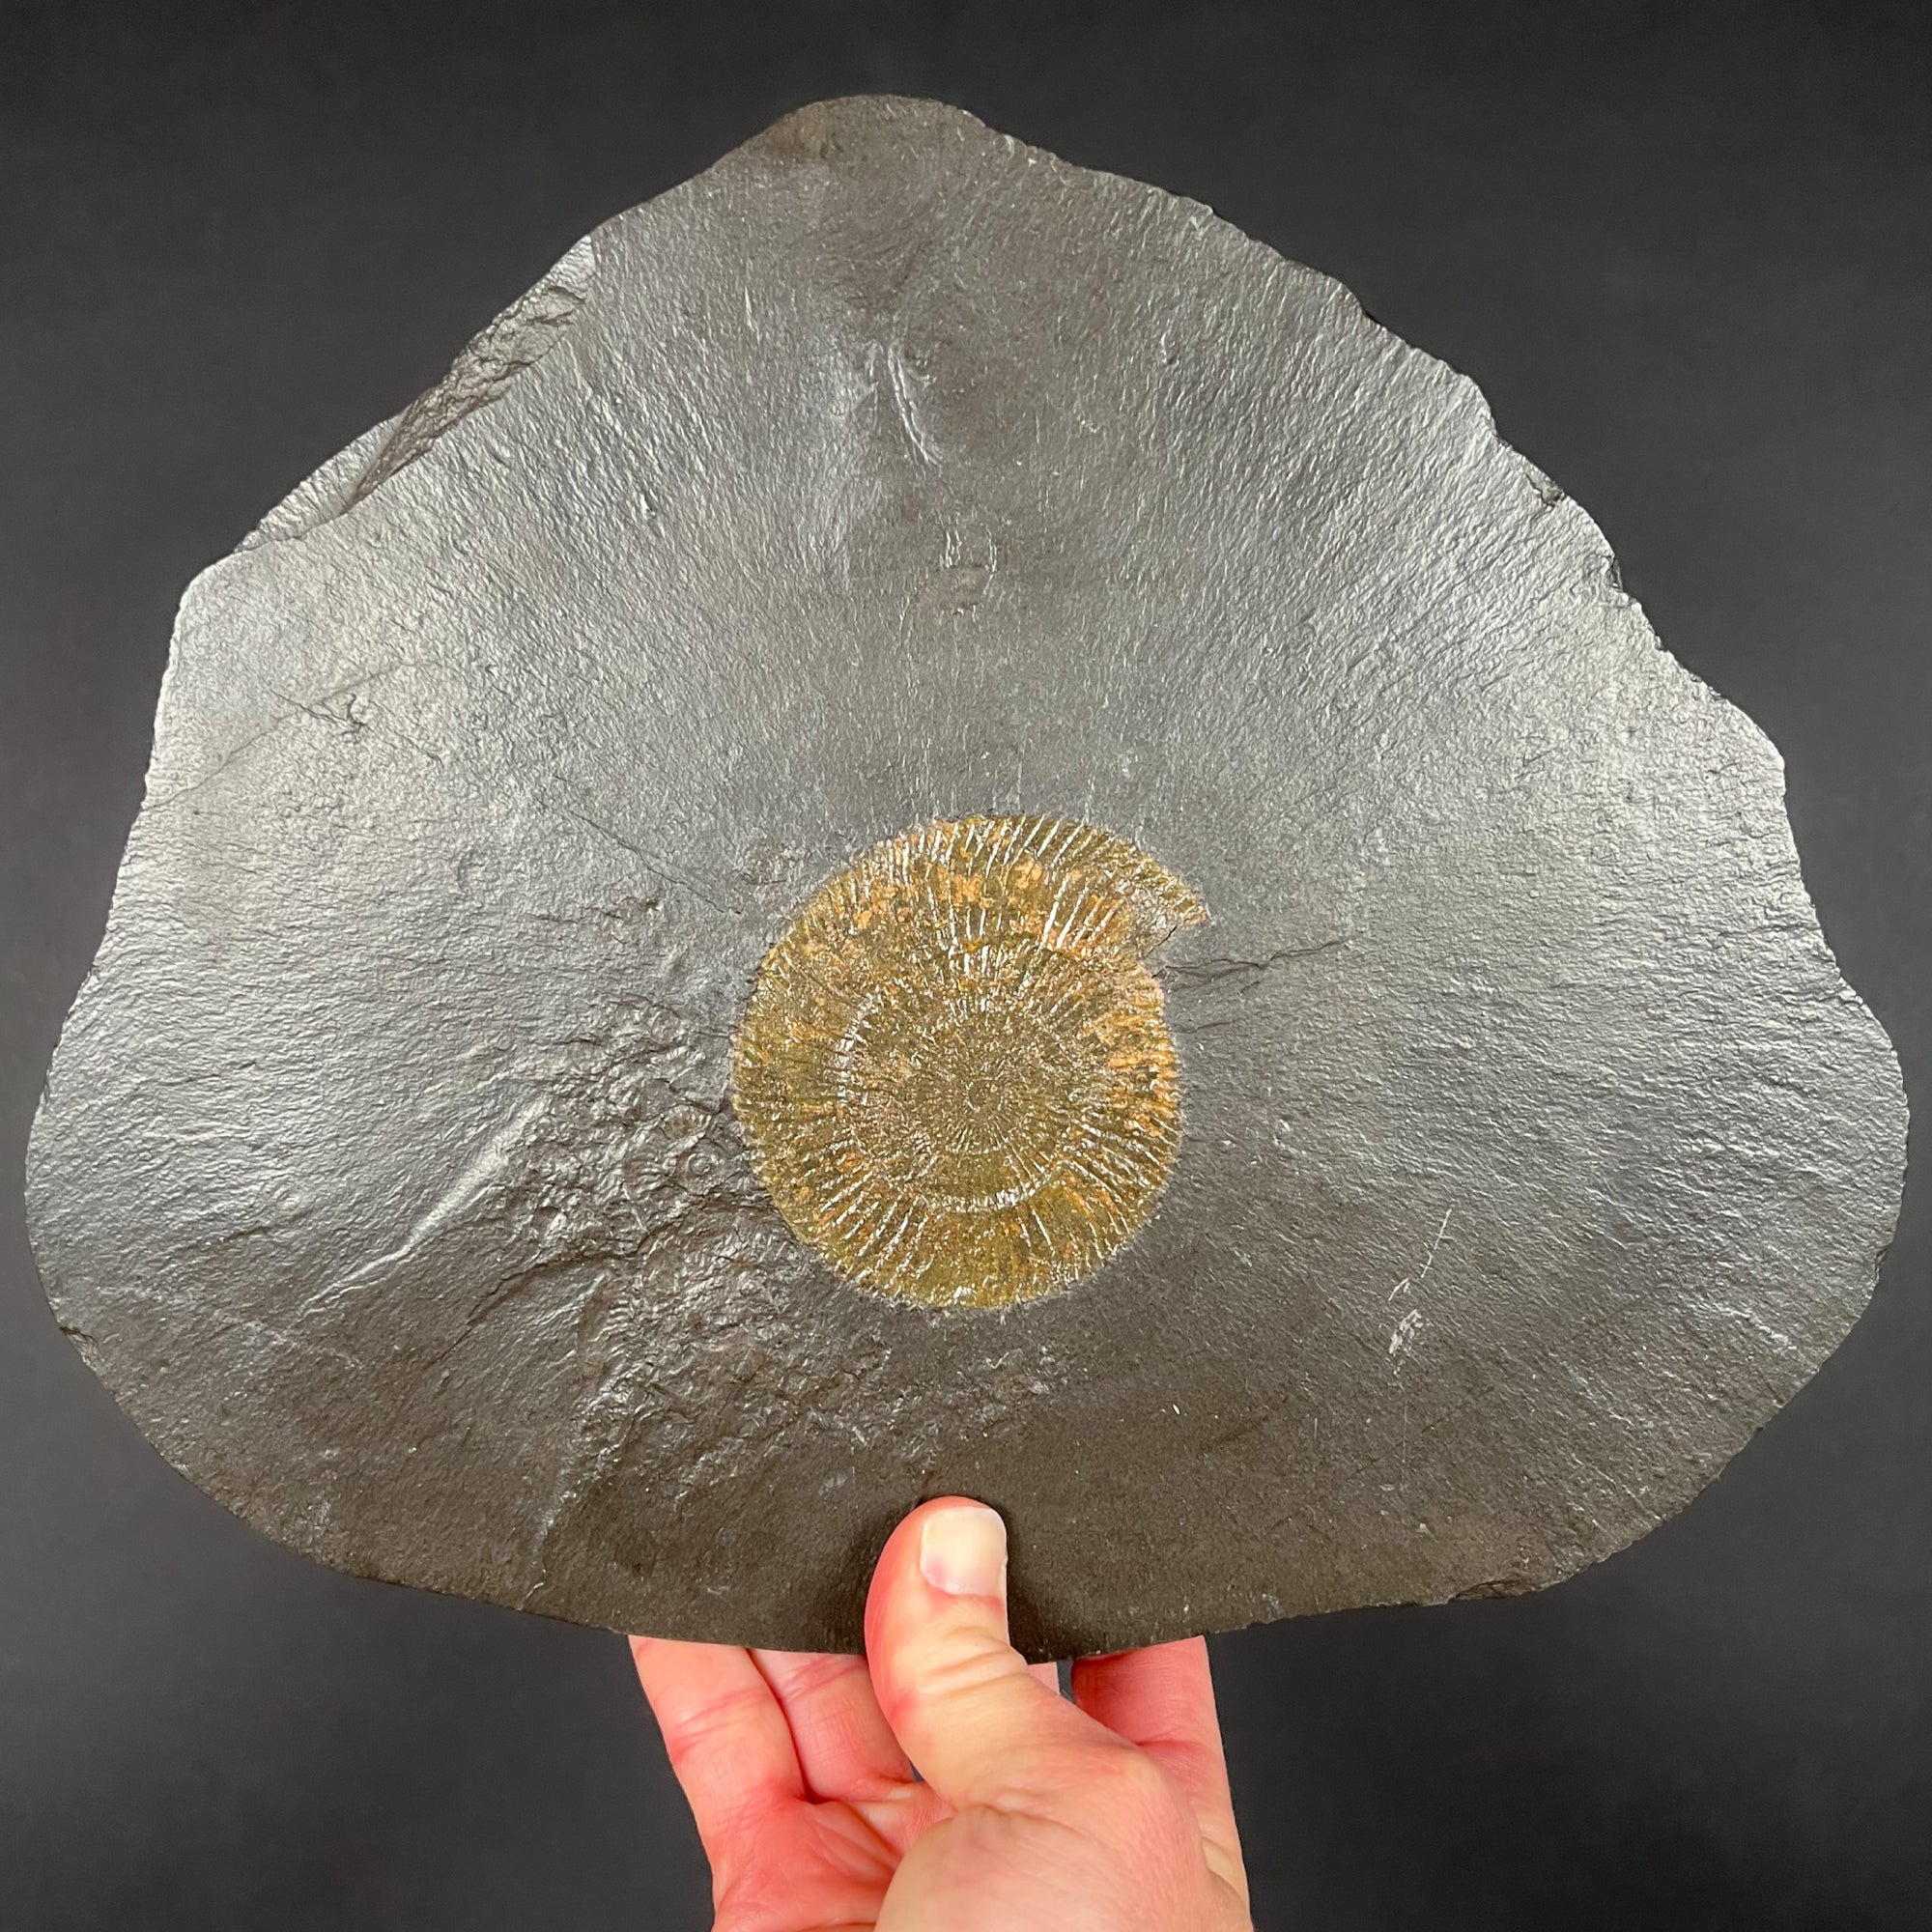 Pyritized Dactylioceras Ammonite Fossils on Matrix | For Sale - Unearthed  Store